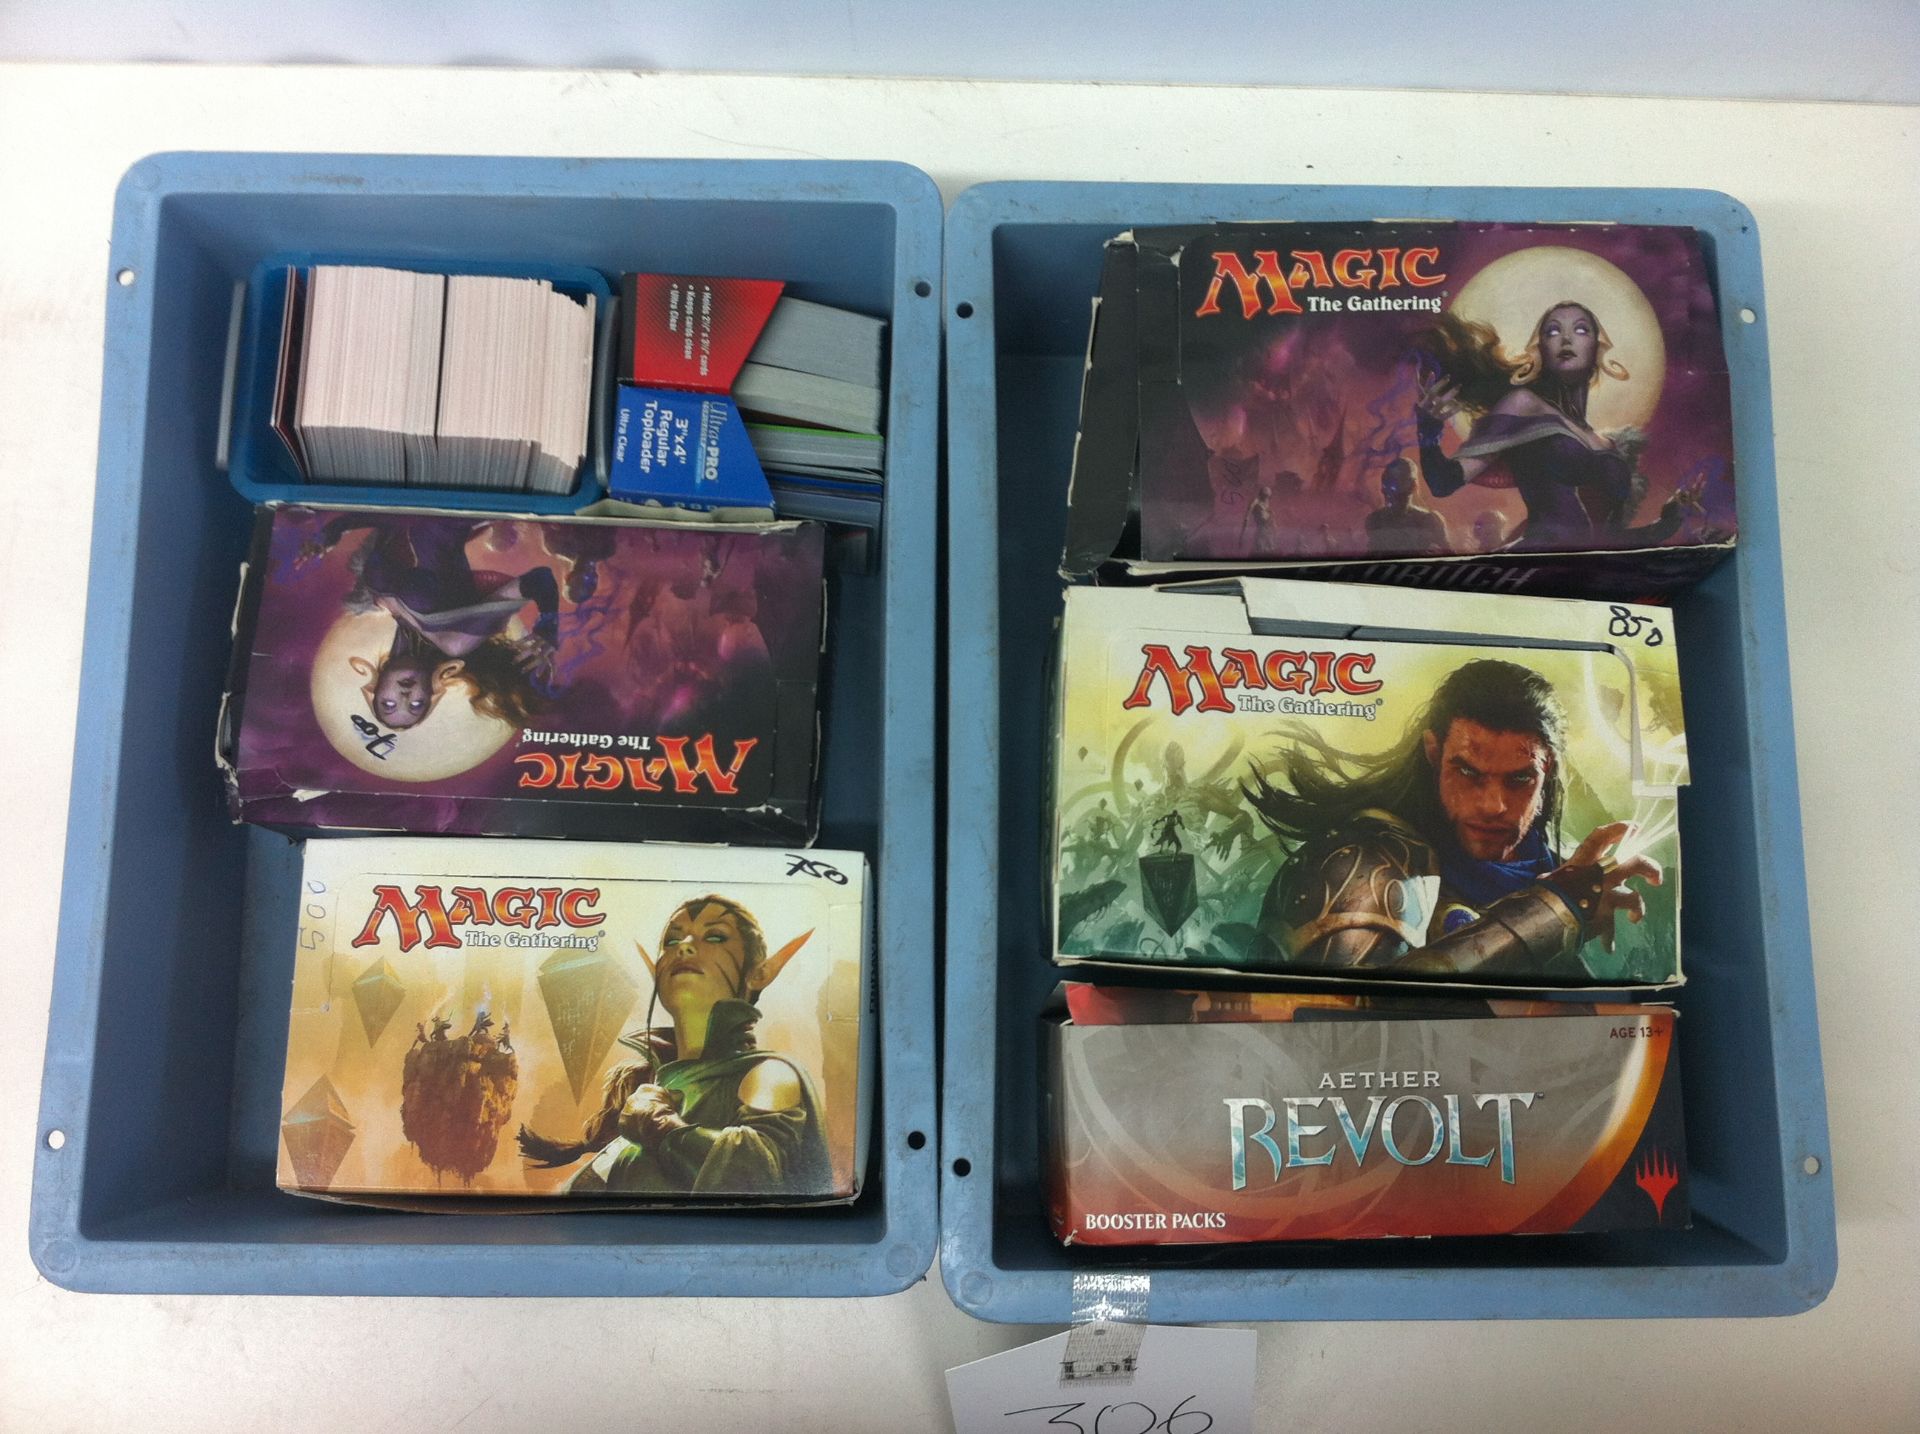 Shelf of Magic The Gathering Trading Cards and related collectables, as photographed.